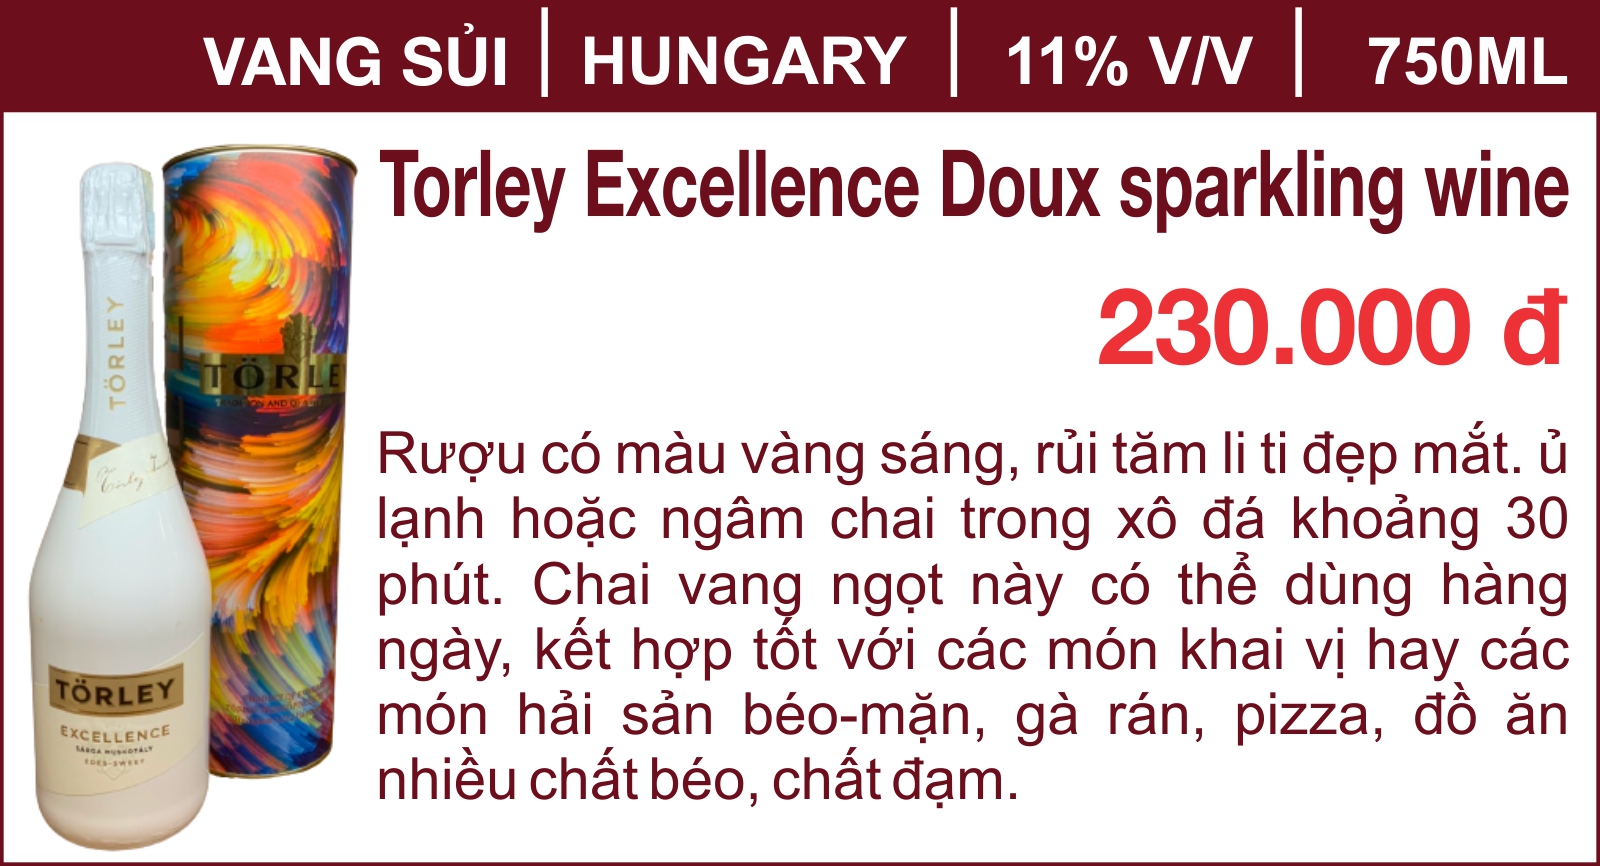 Torley Excellence Doux sparkling wine